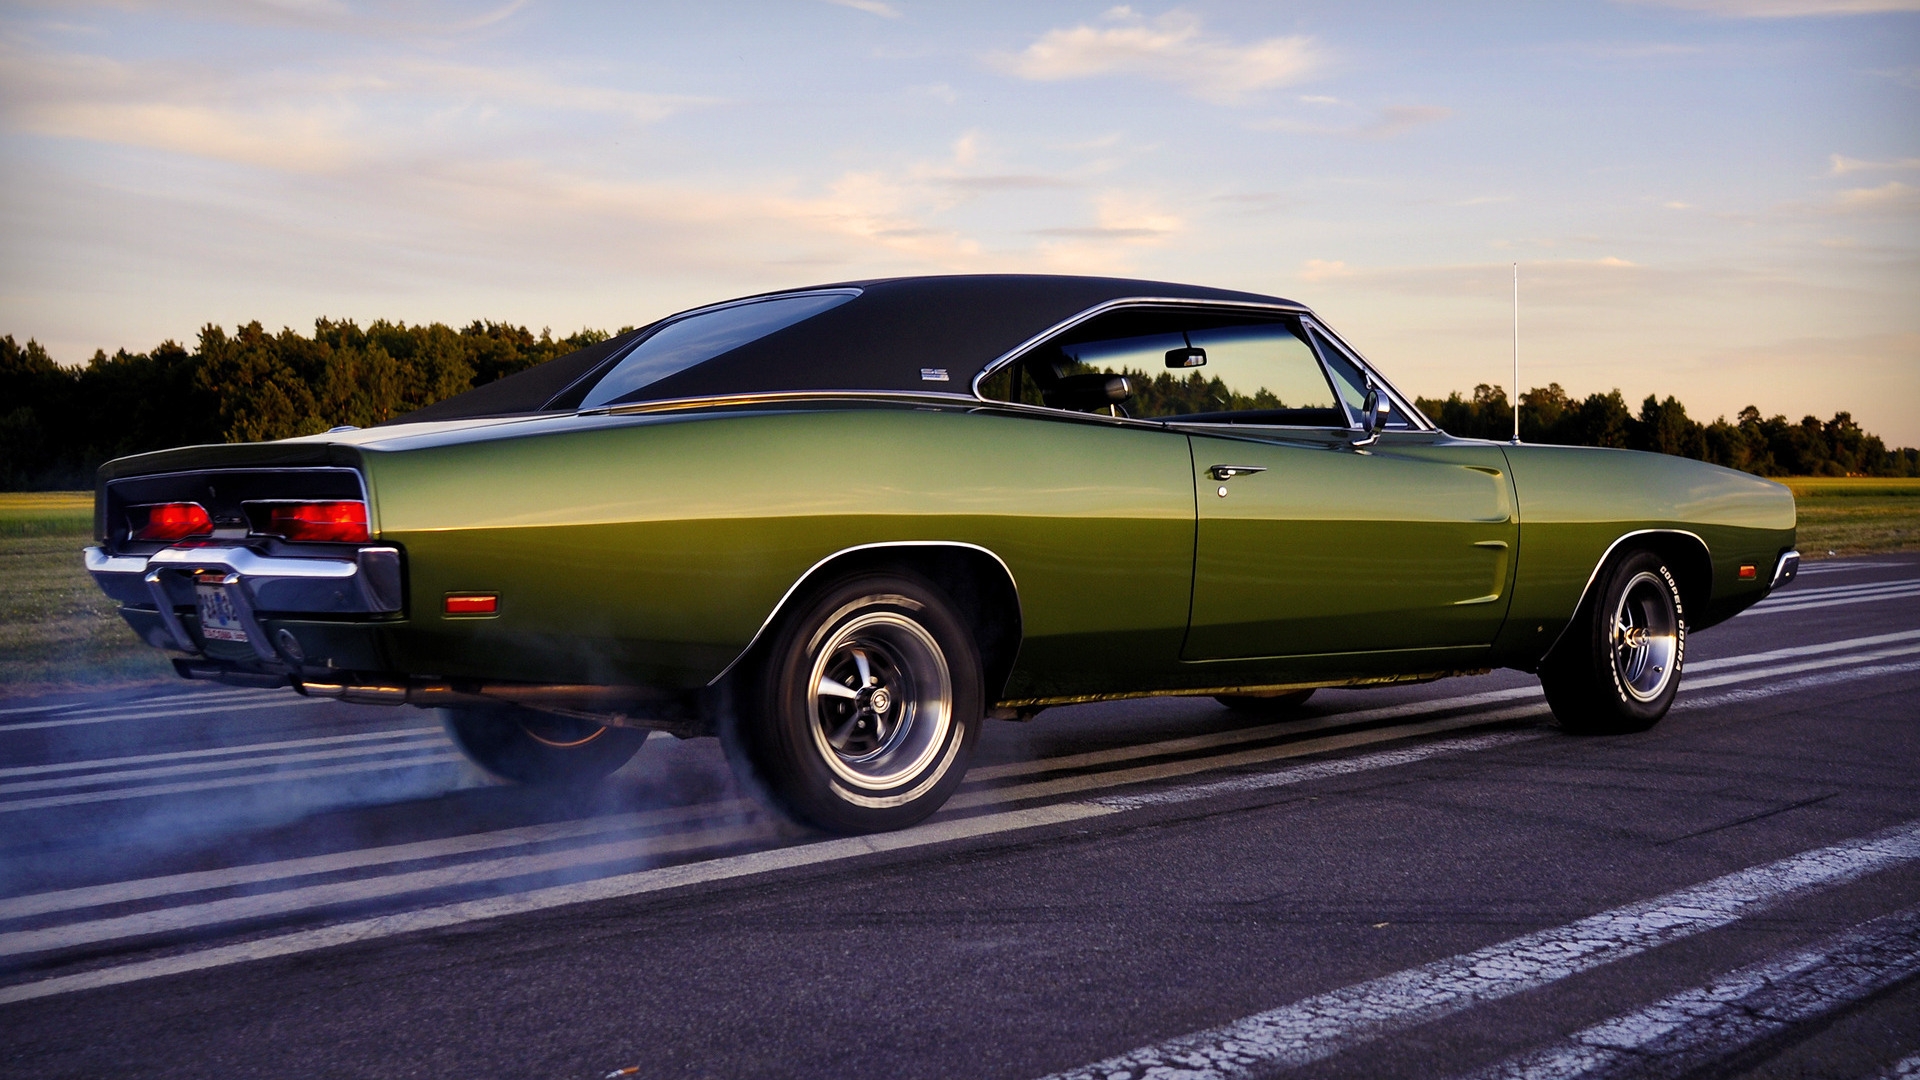 HD Wallpapers HD 1080p Desktop Wallpapers dodge charger muscle car